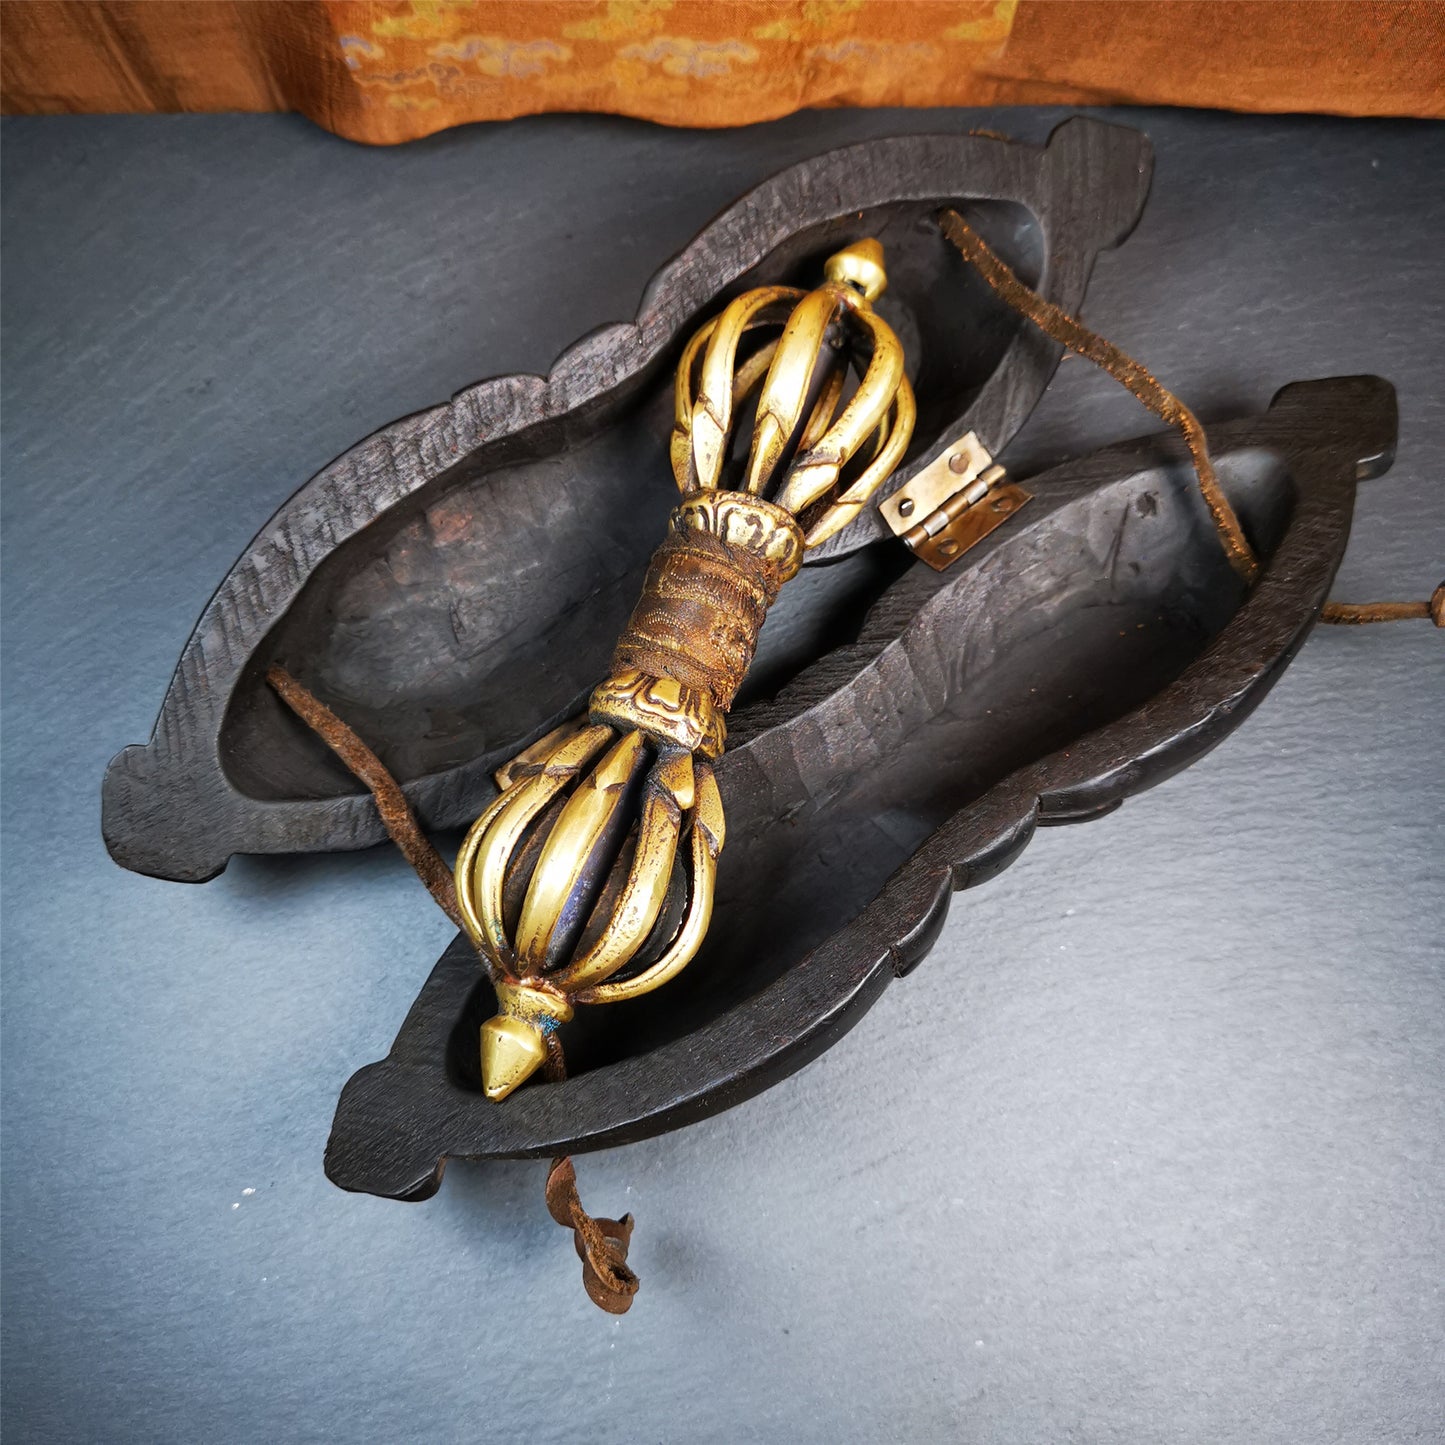 Gandhanra Powerful Vintage Vajra Dorje with Wooden Case ,Tibetan Tantric Buddhism (Vajrayana) Ritual Implement,handmade in Nepal,use traditional techniques and materials. The Nine-pronged vajra is made of brass, and the outer box is made of wood.